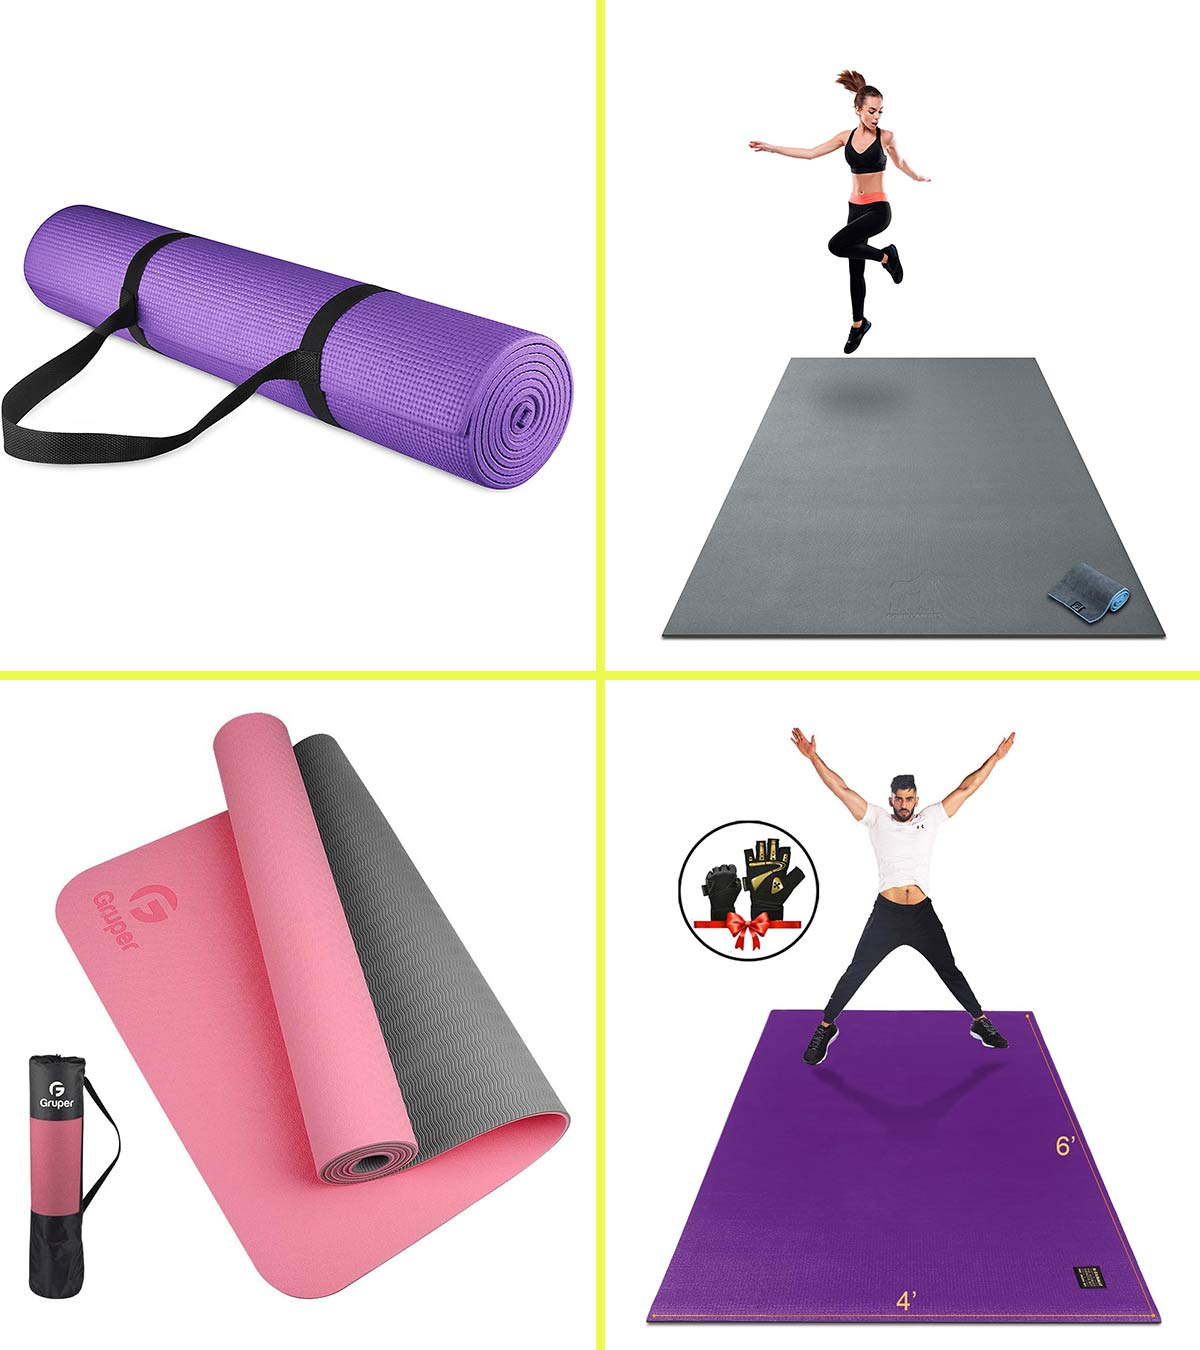 10 Moves With Just a Yoga Mat - No Fancy Equipment Needed – DMoose